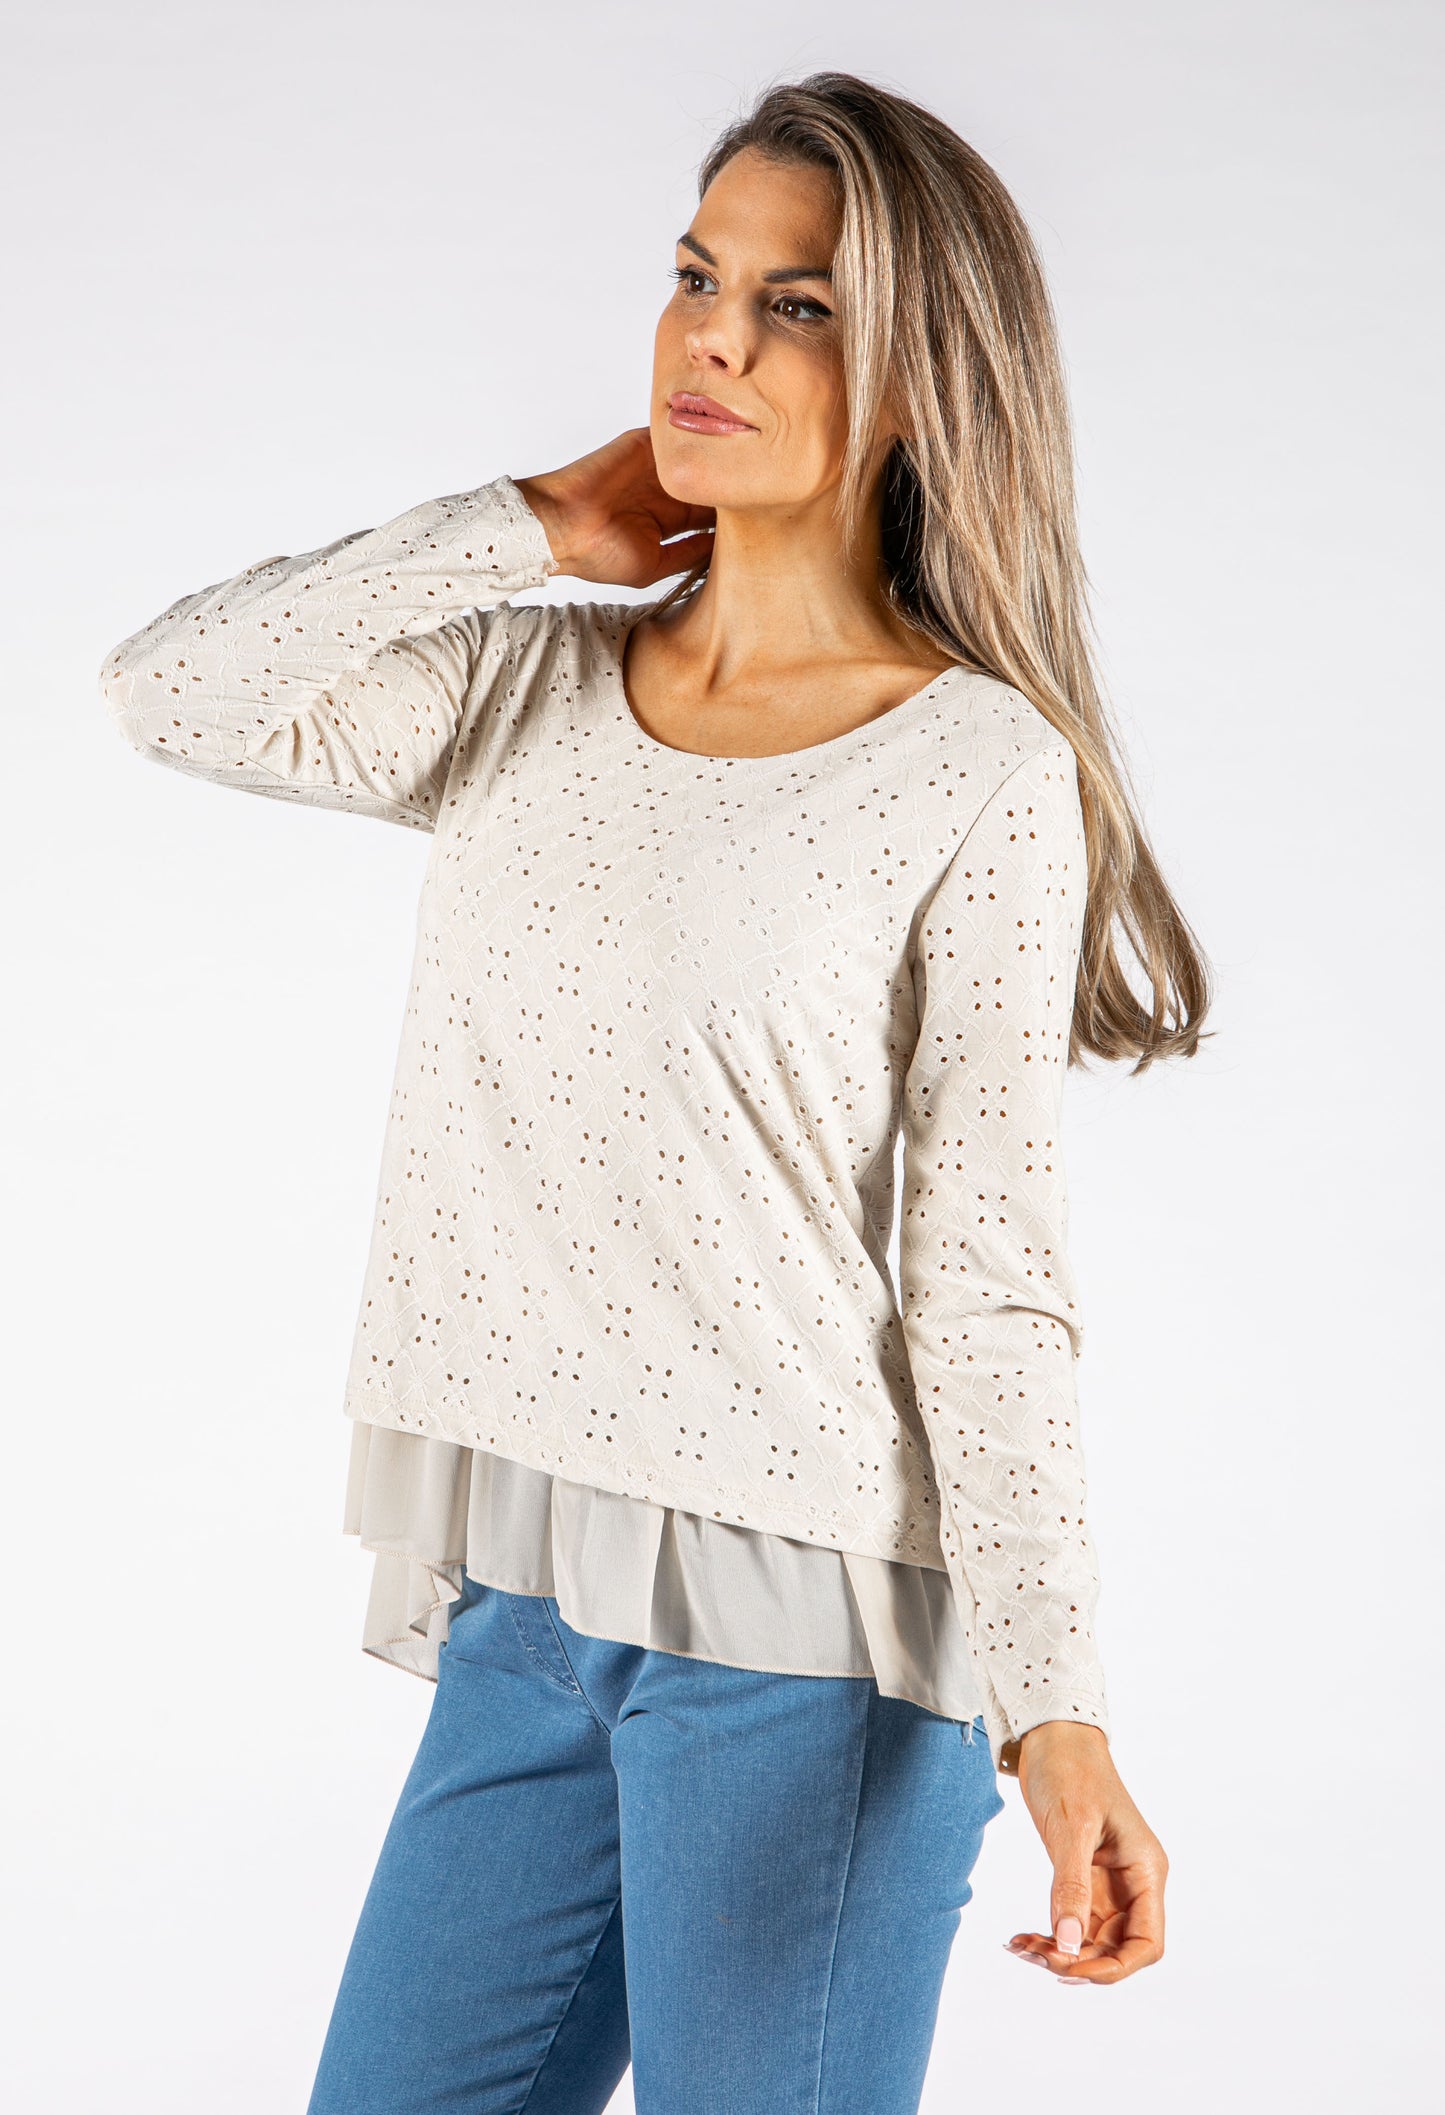 Layered Look Cut Out Detailing Top